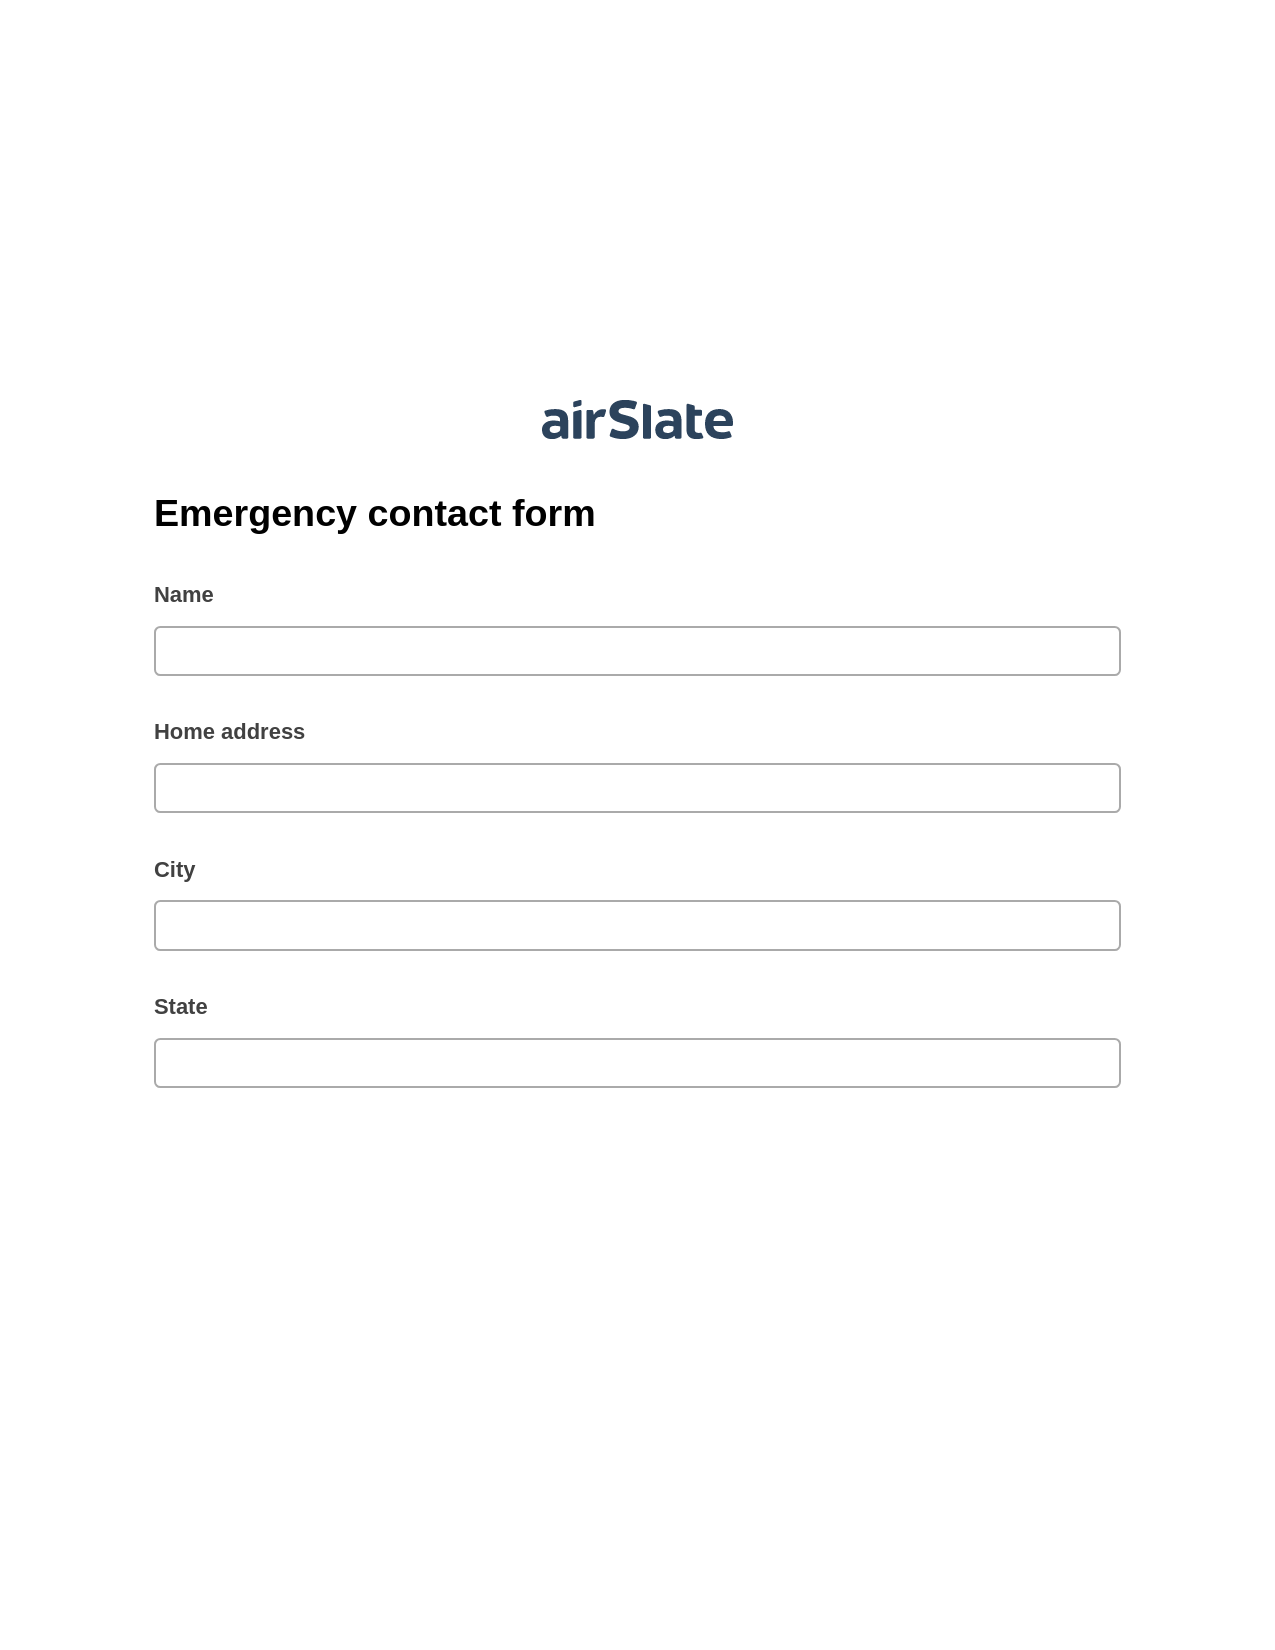 Emergency contact form Pre-fill from NetSuite Records Bot, Mailchimp send Campaign bot, Export to Excel 365 Bot